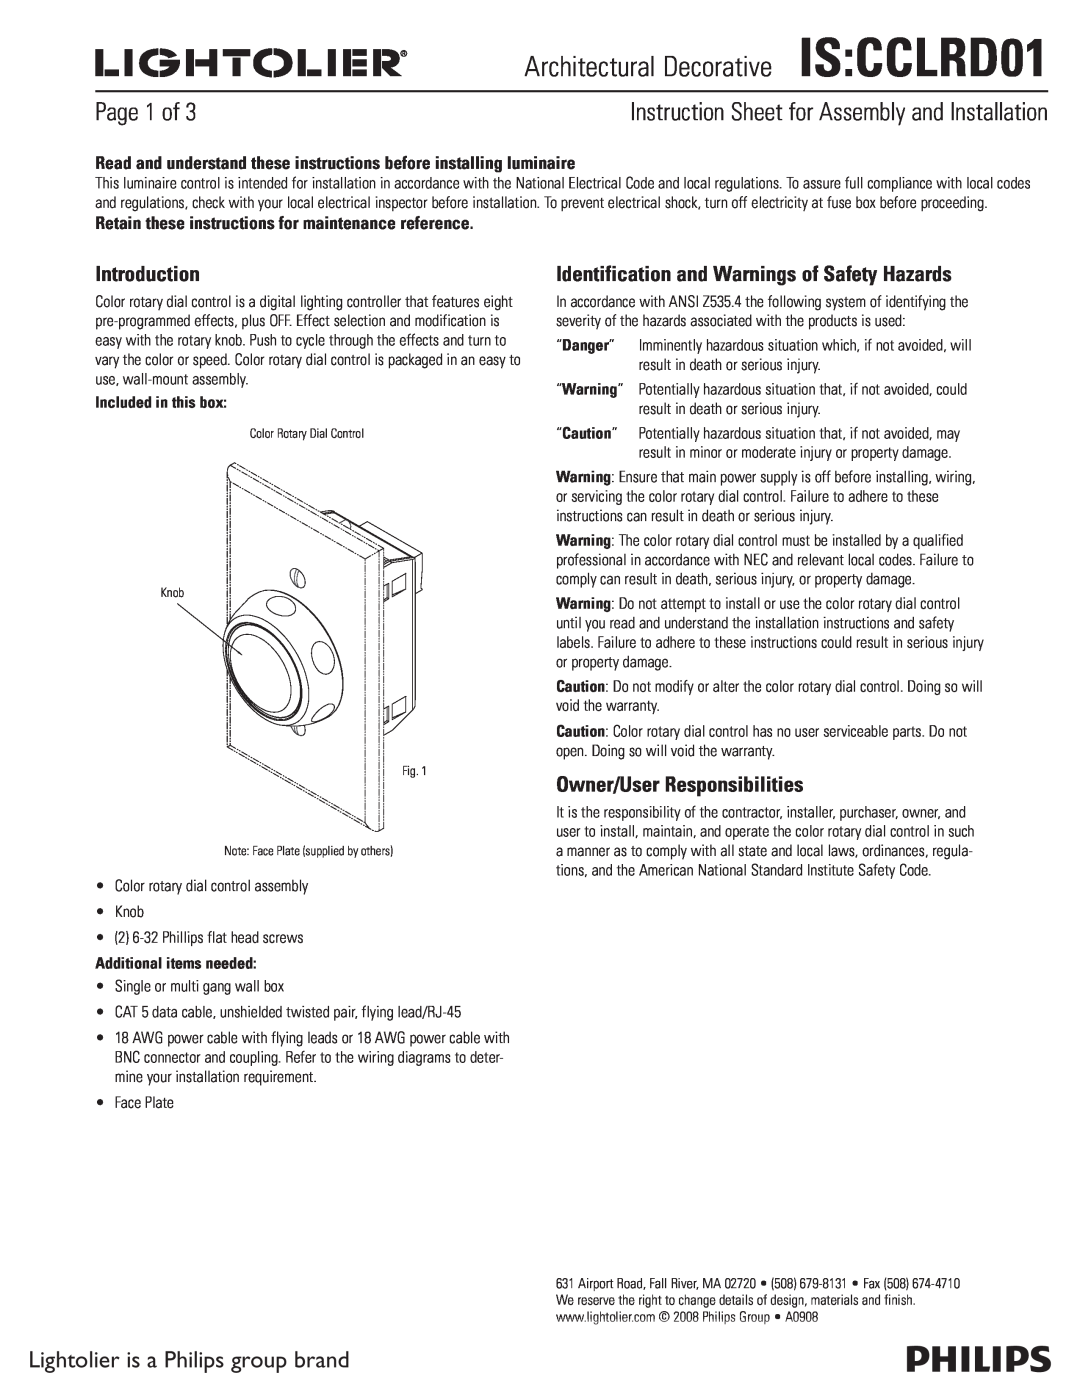 Lightolier instruction sheet Architectural DecorativeIS CCLRD01, Instruction Sheet for Assembly and Installation 